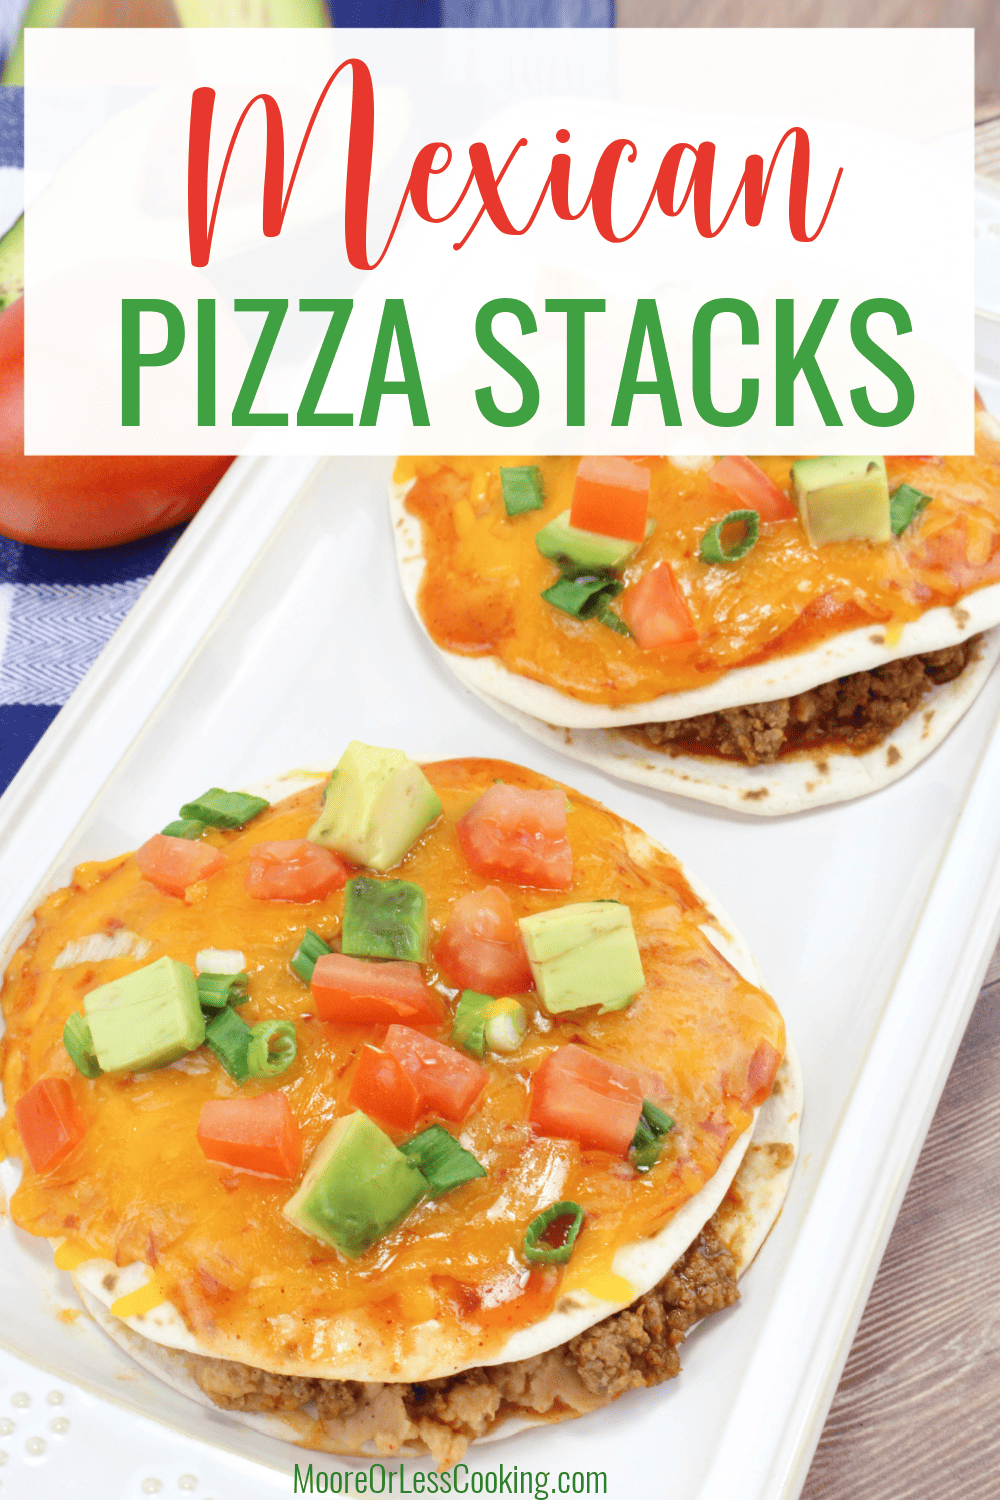 These easy-to-make Mexican Pizza Stacks are always a family favorite! Round tortillas are layered with spicy ground beef, enchilada sauce, refried beans, and cheese and baked to warm and melty perfection. They're loaded with flavor and are always a hit with kids as well as adults. via @Mooreorlesscook